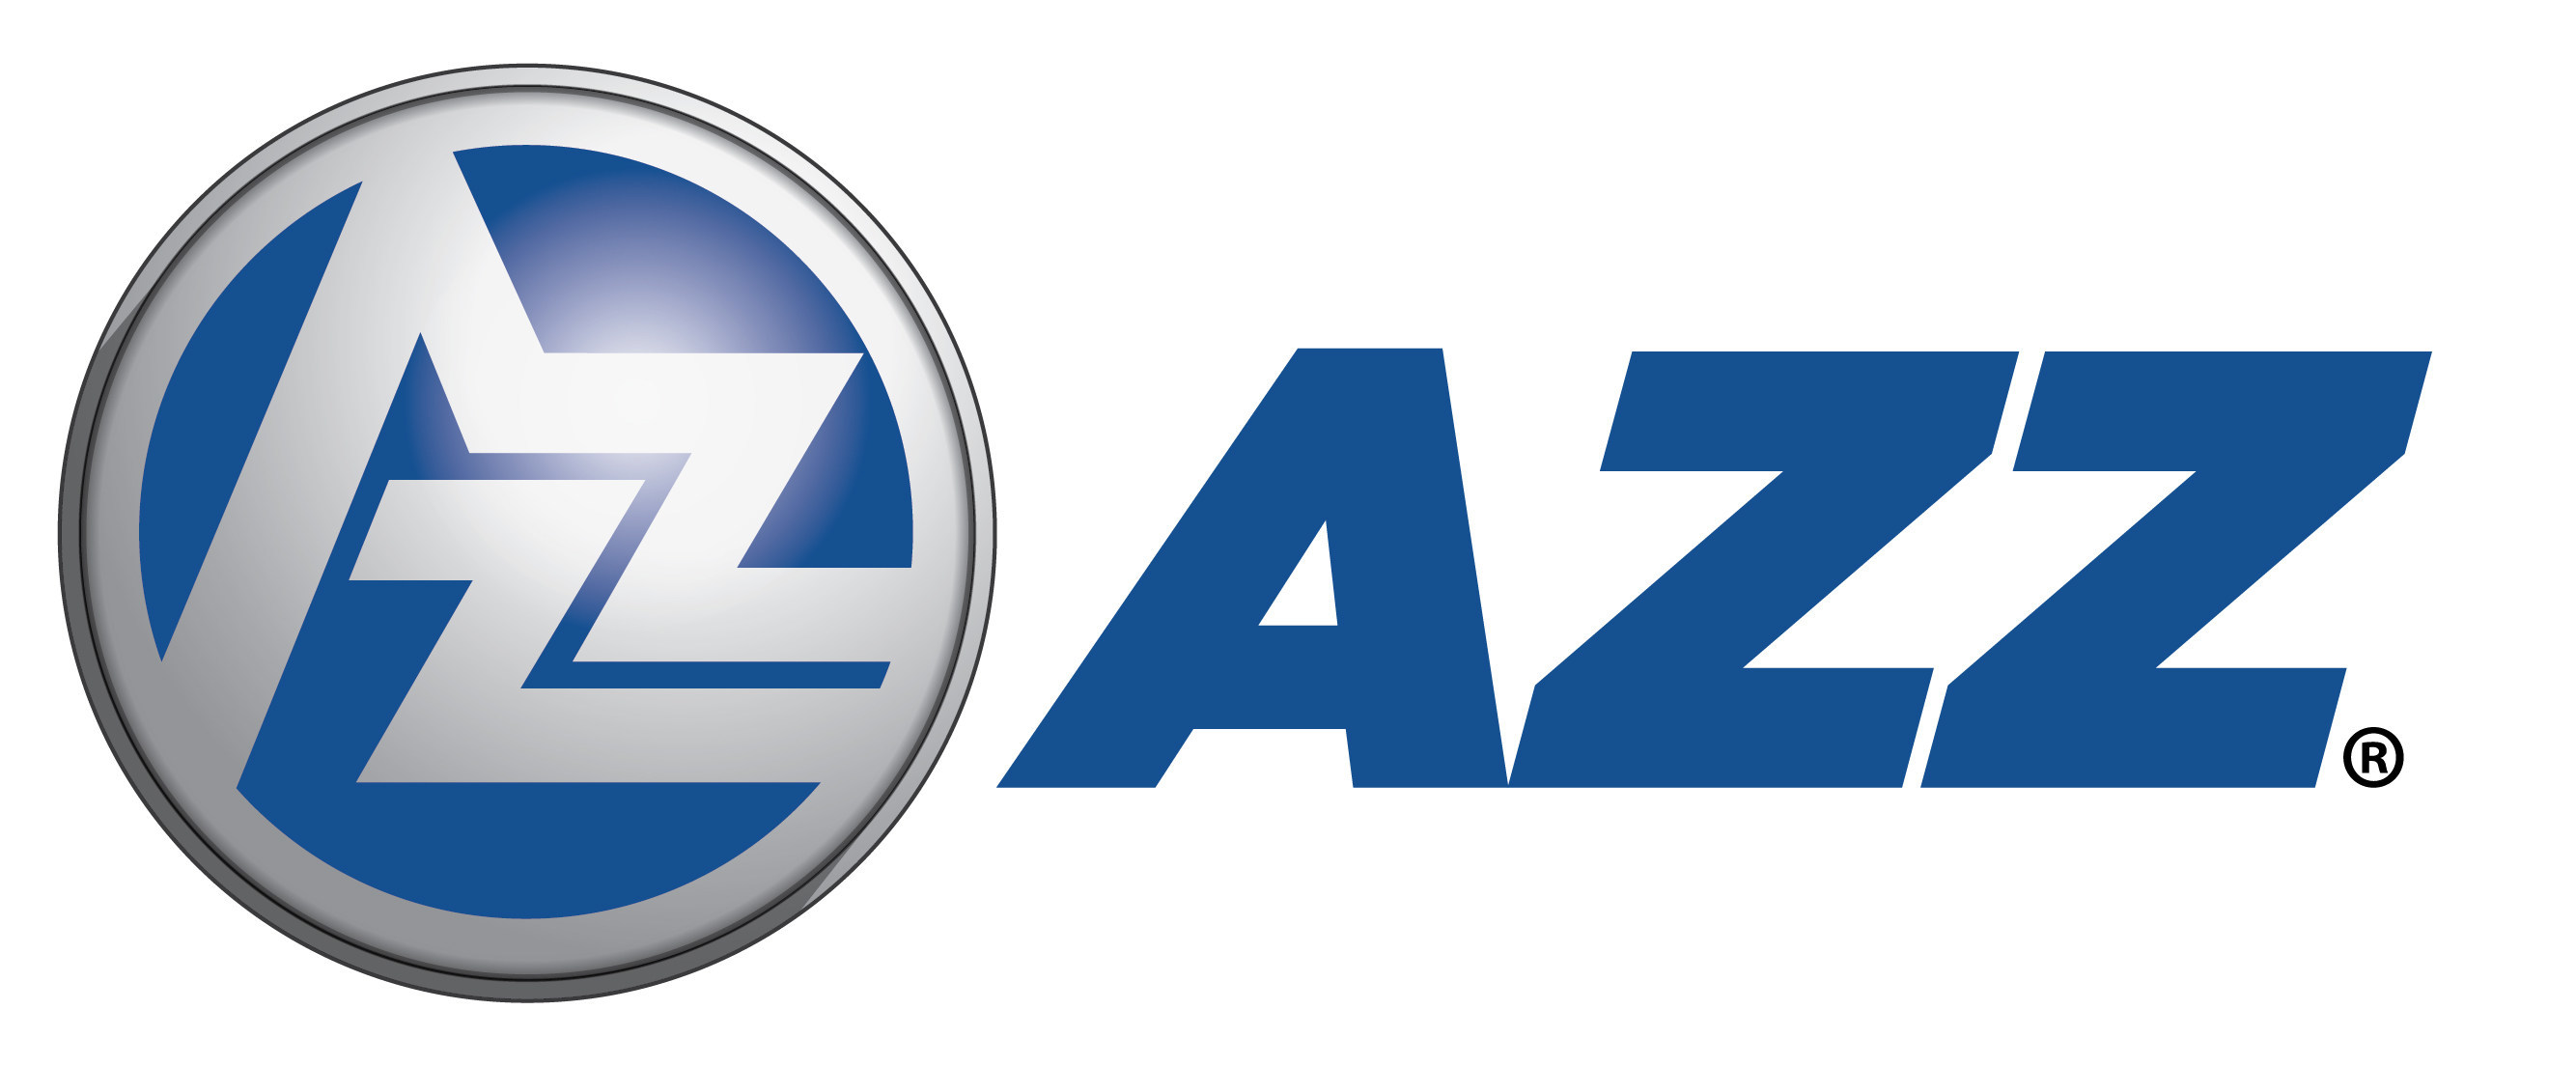 AZZ Inc is the leading independent provider of hot-dip galvanizing and coil coating solutions in North America. (PRNewsfoto/AZZ, INC.)